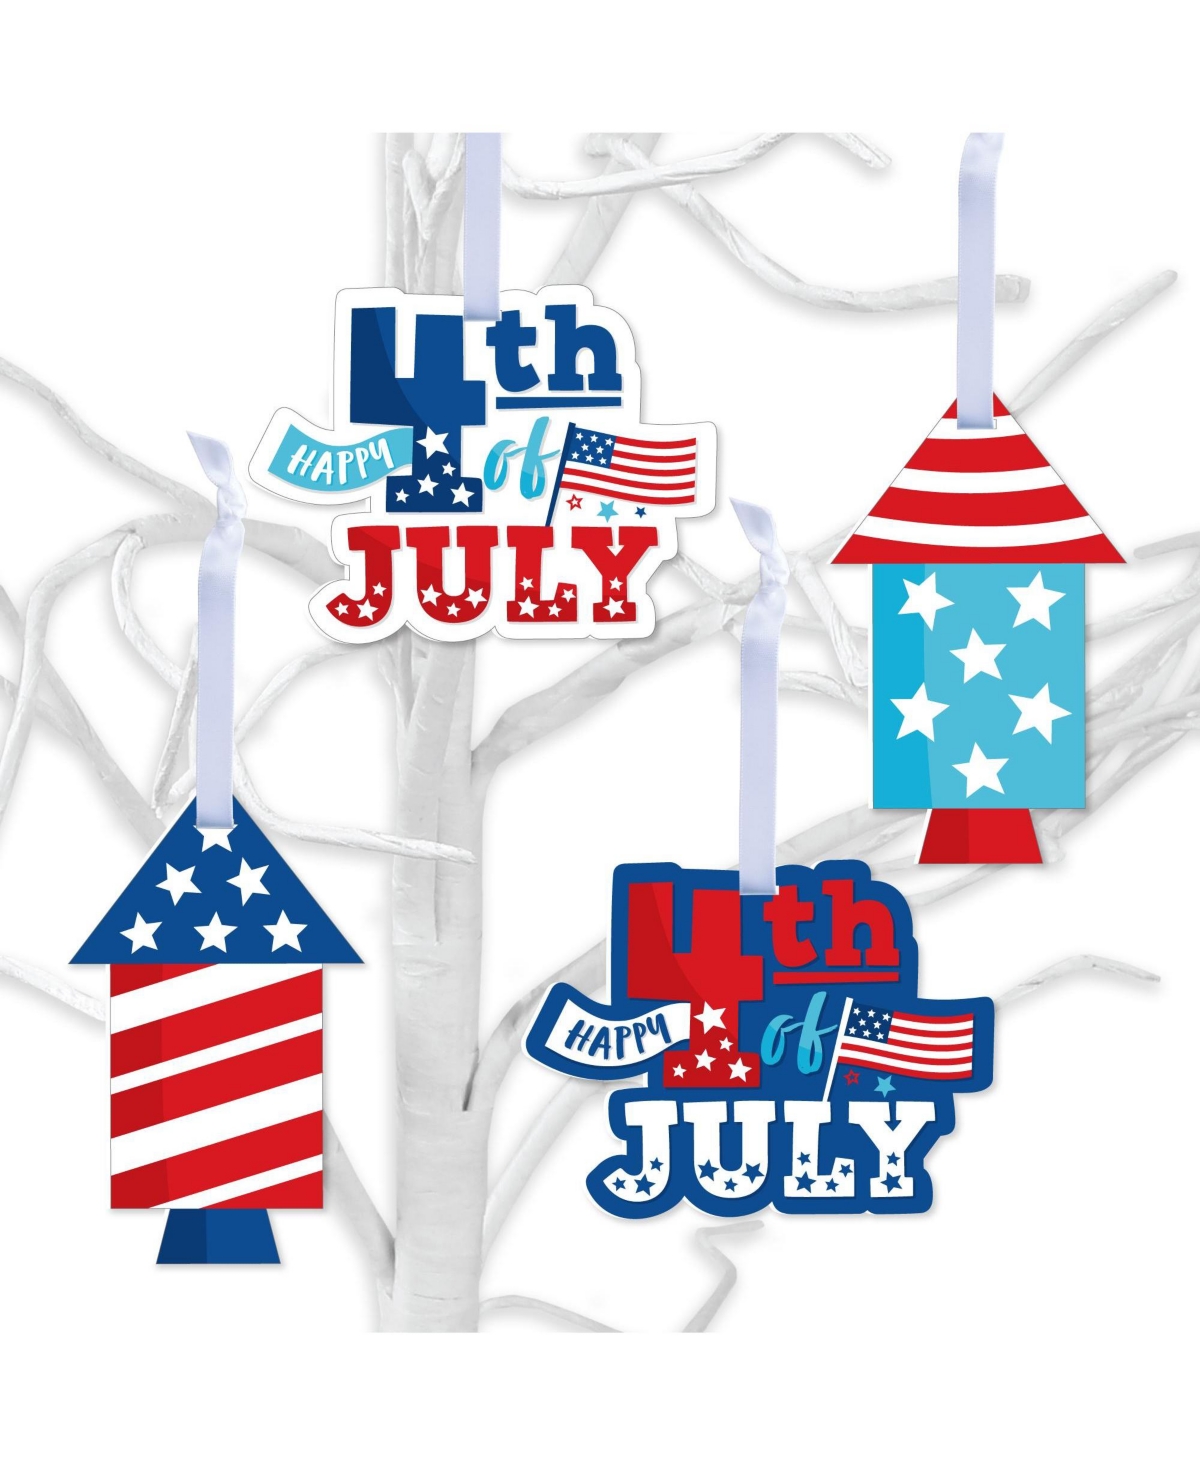 Firecracker 4th of July - Red, White & Blue Decorations - Tree Ornaments - 12 Ct